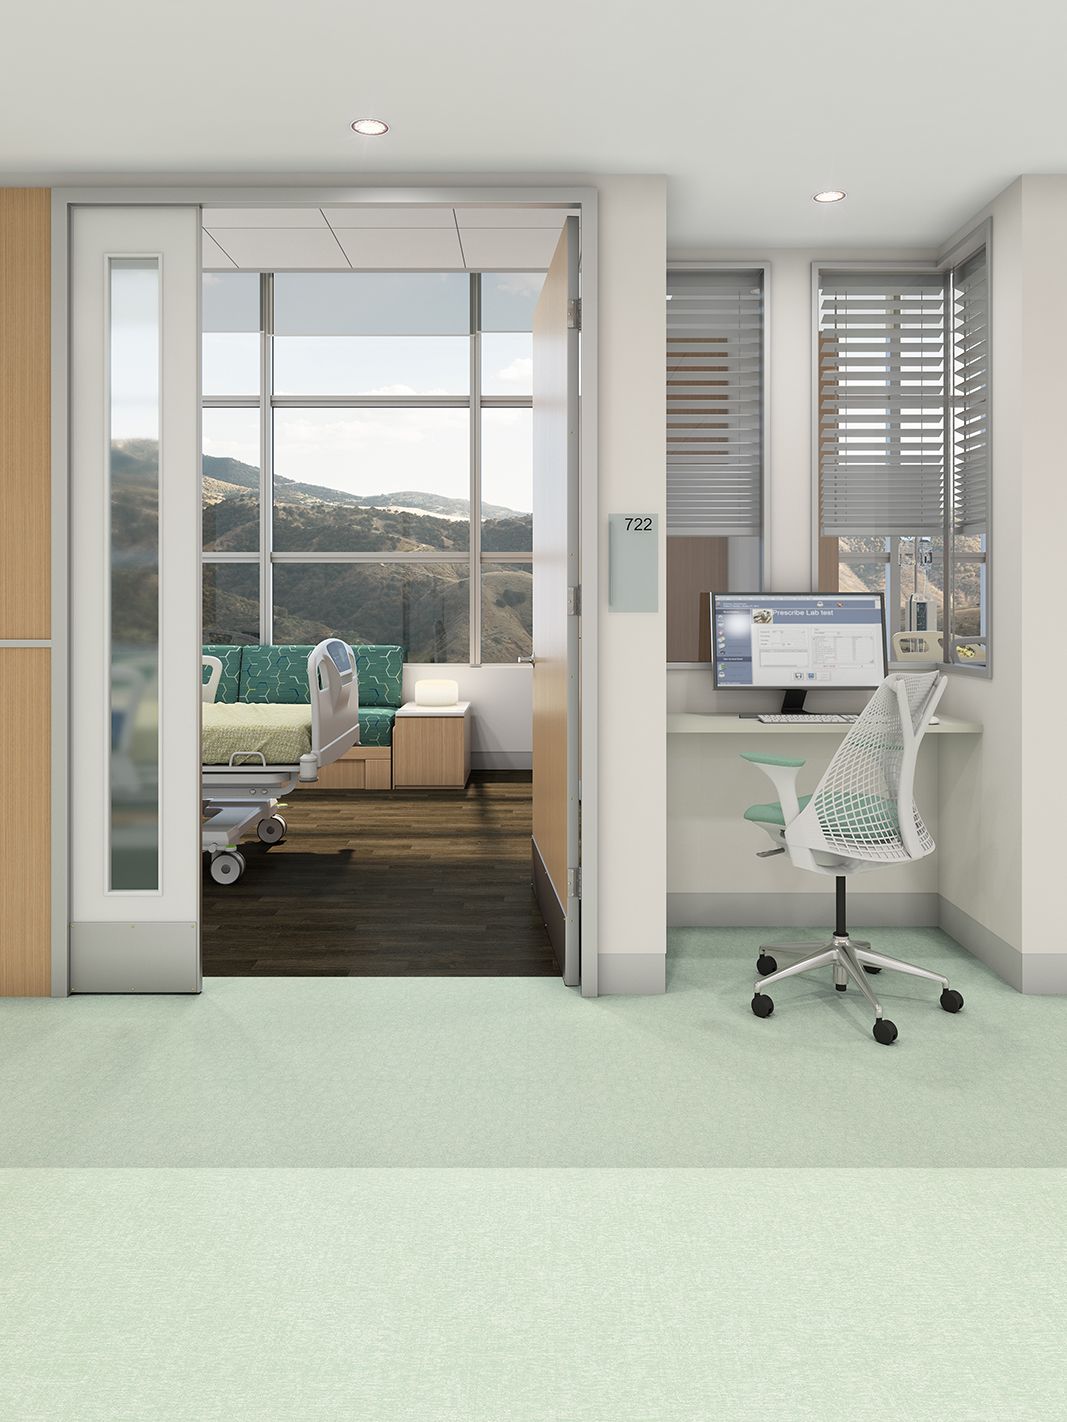 Interface's Spike-tacular, Bloom with a View and Continual Woodgrains vinyl sheet in hospital corridor and patient room imagen número 8